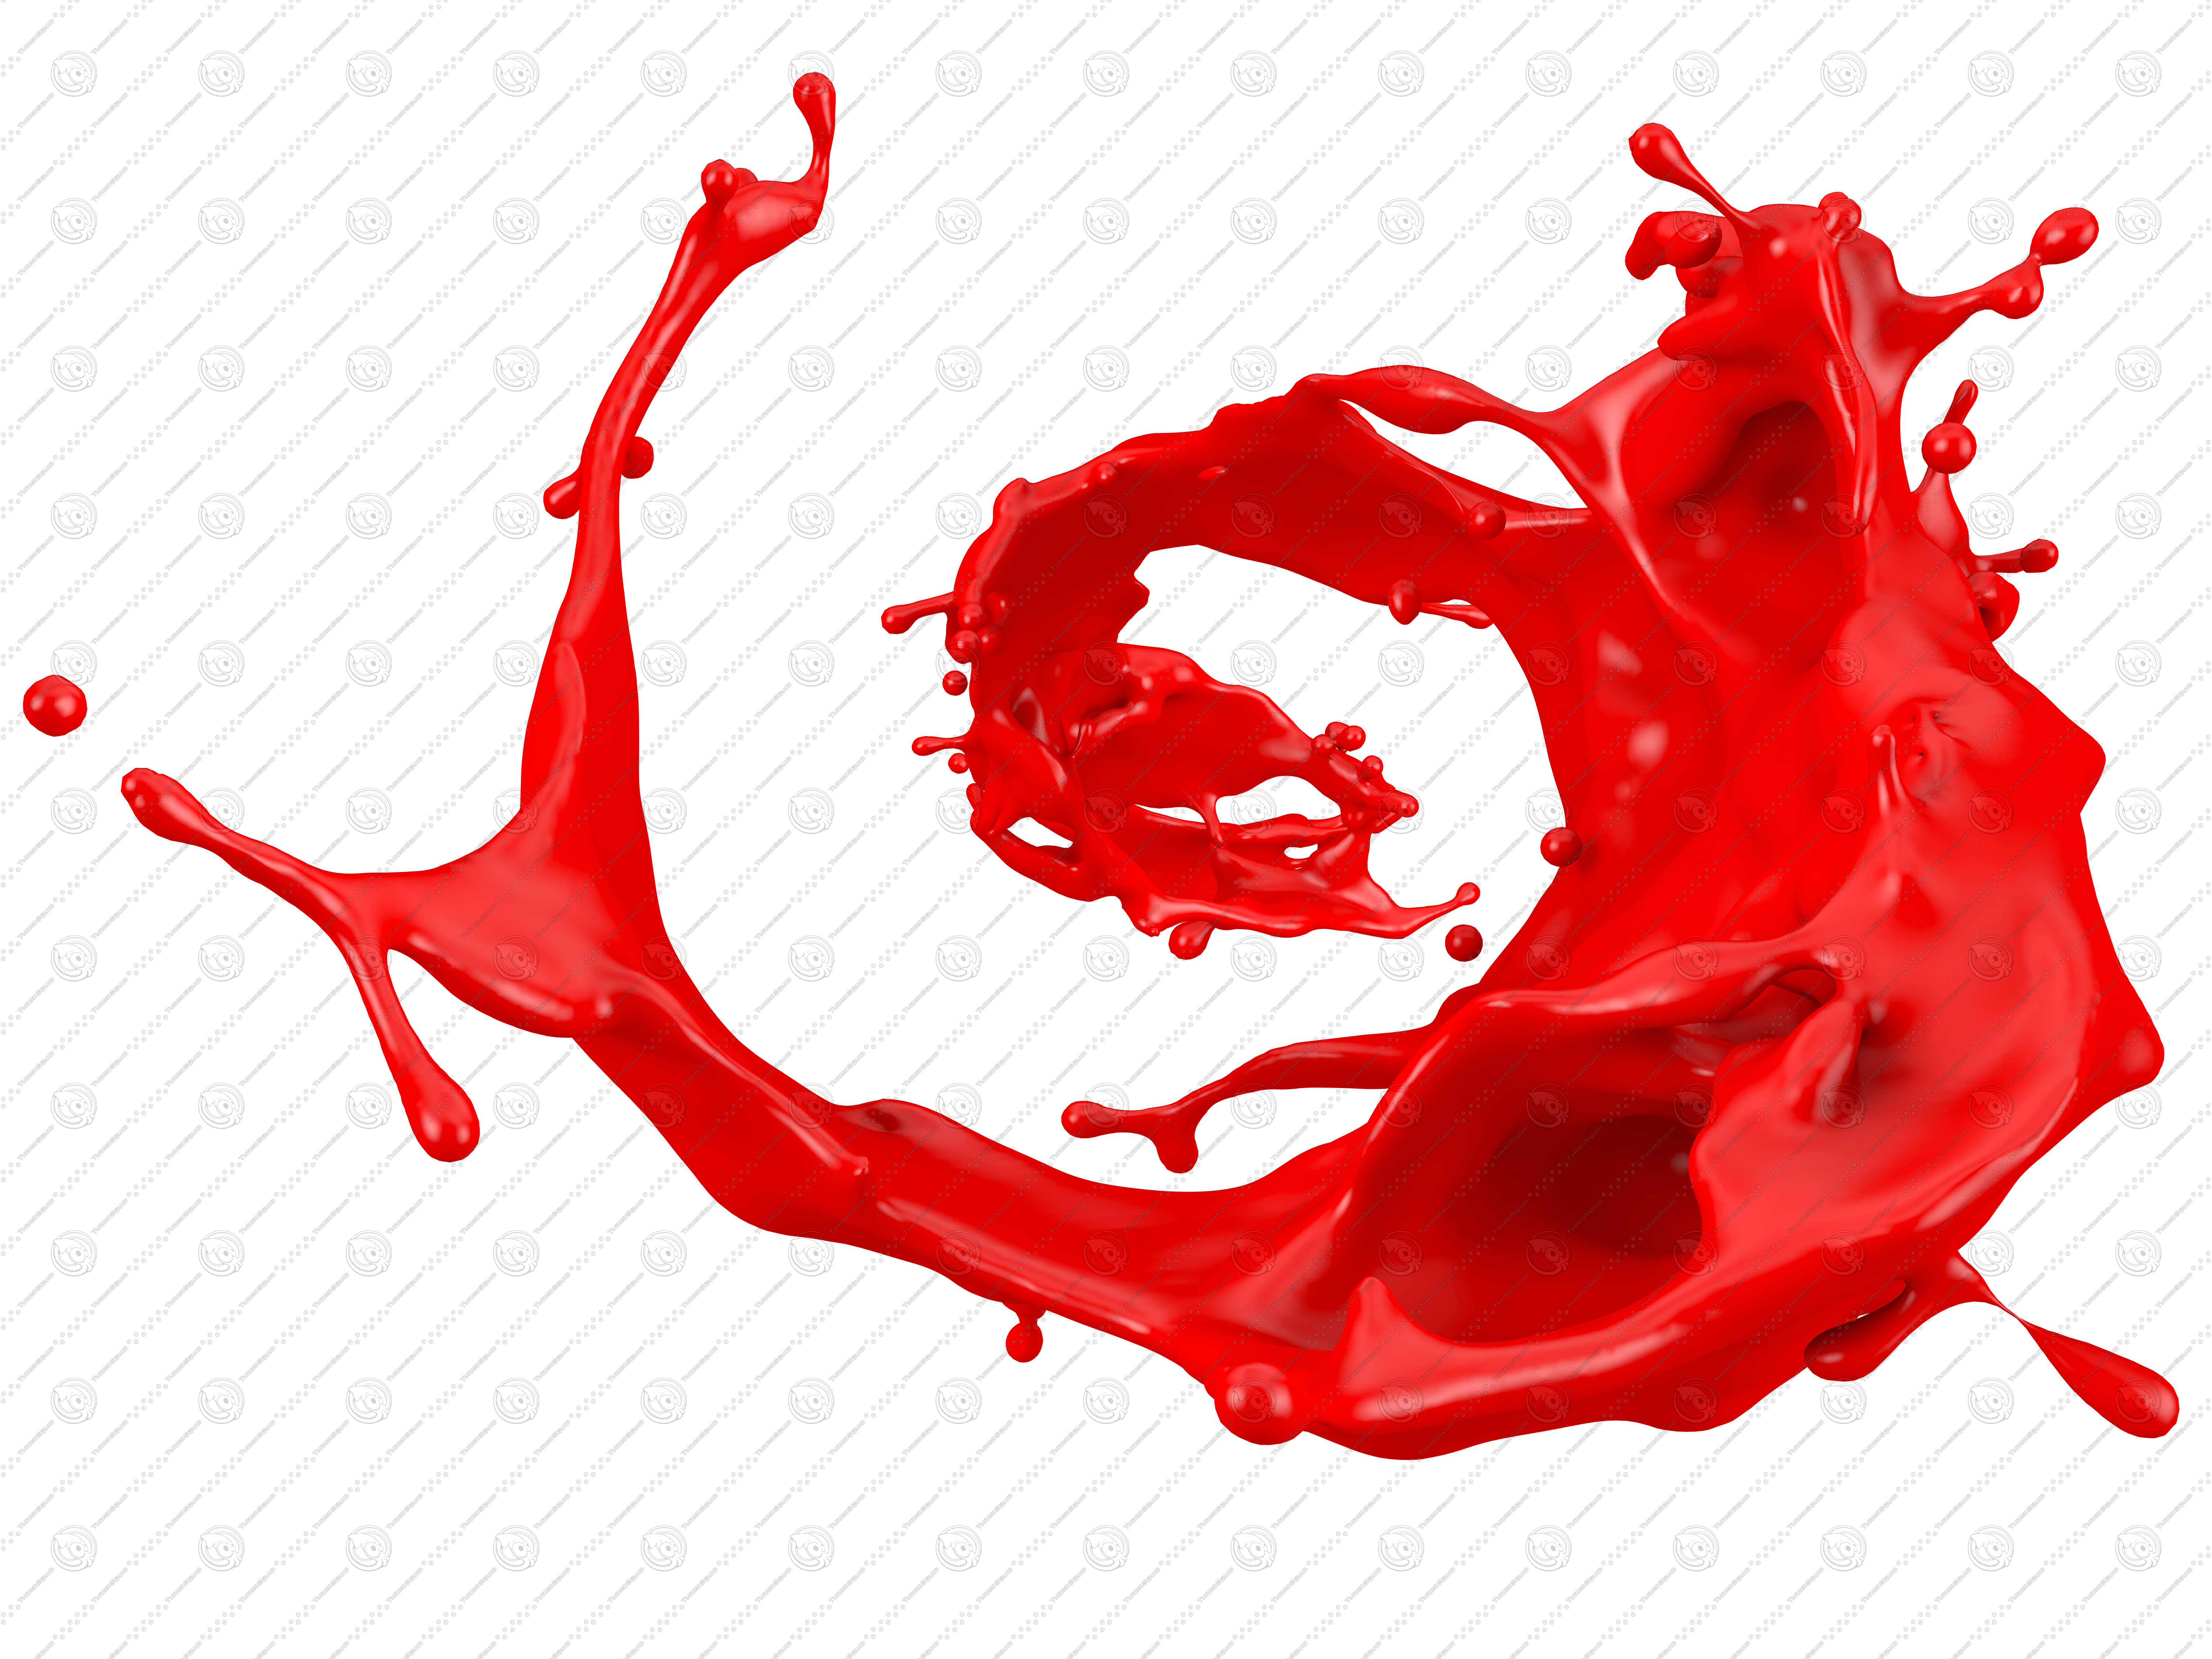 Free Red Paint Splash Png, Download Free Red Paint Splash Png png image, Free ClipArts on Clipart Library